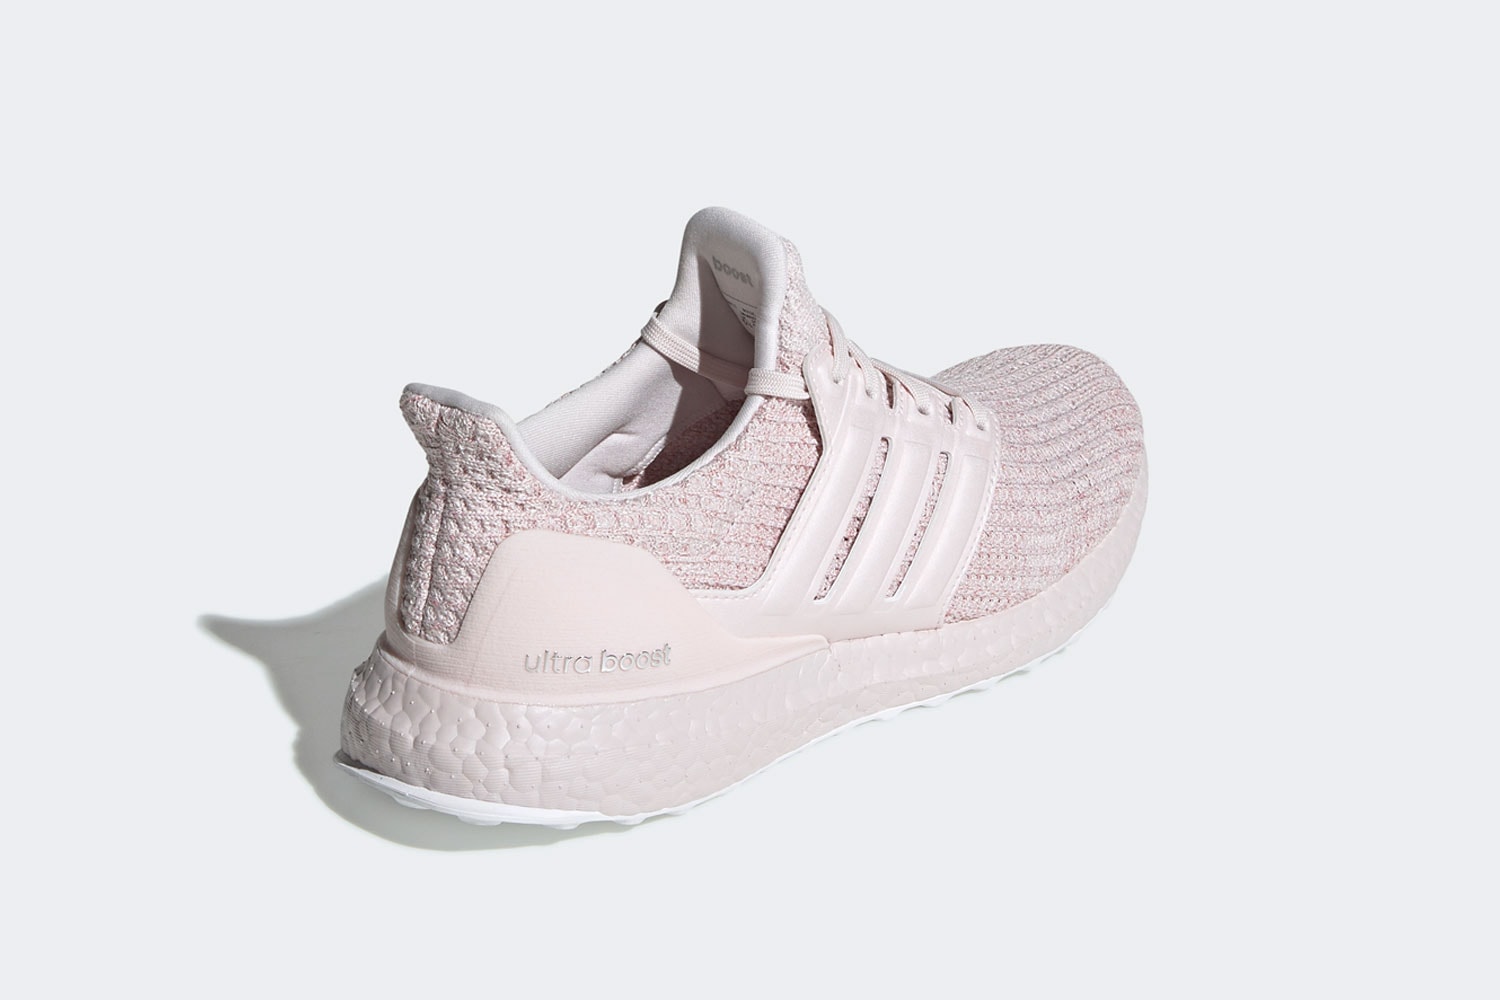 adidas ultraboost running shoes sneakers orchid tint pink